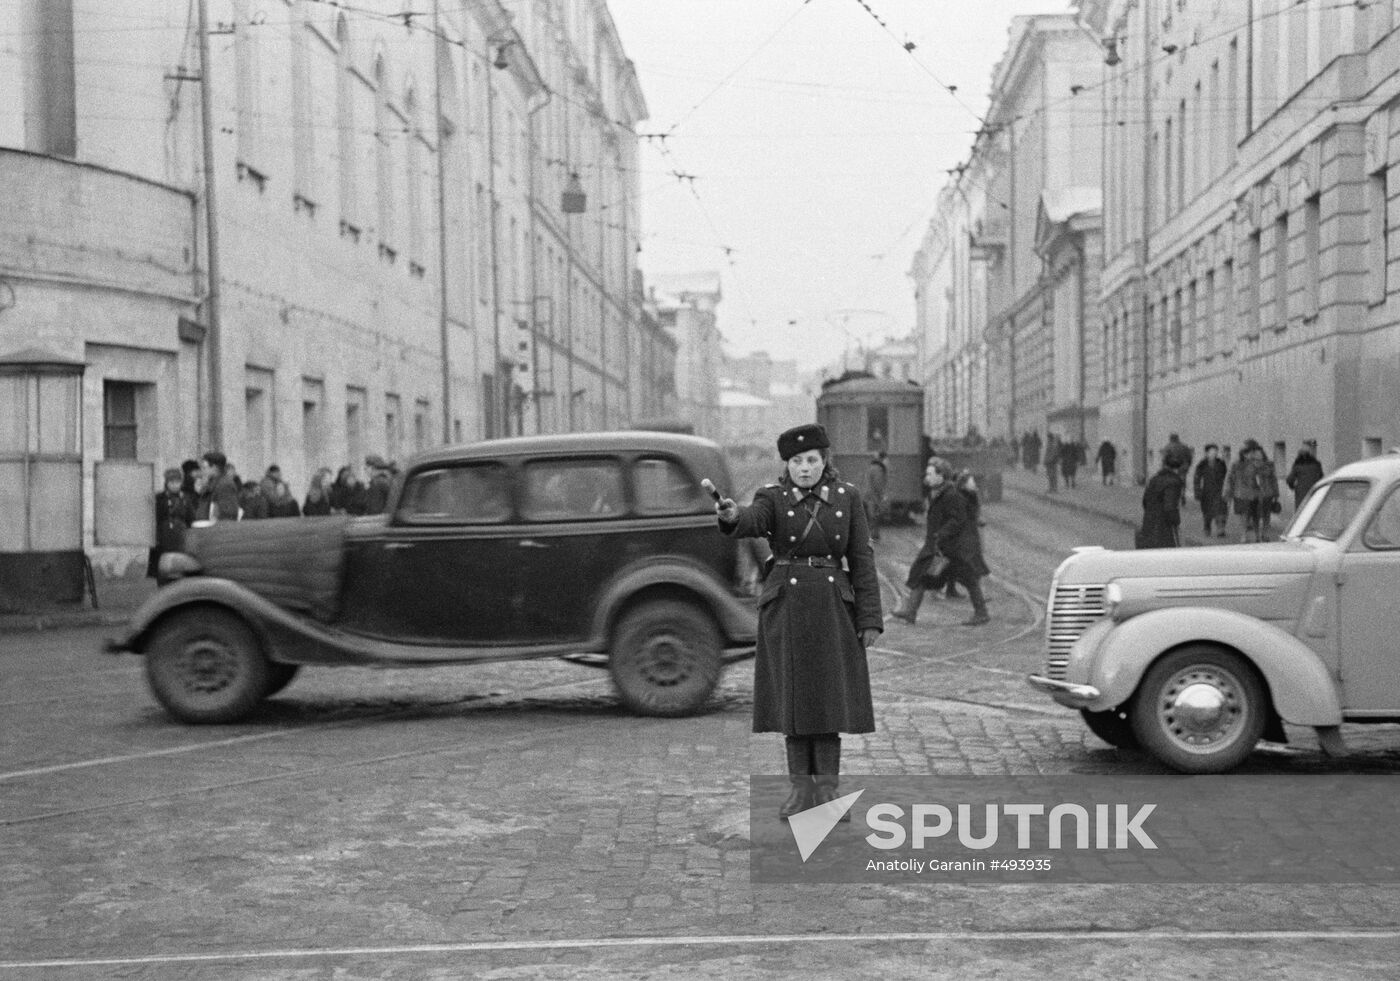 A traffic policewoman on a Moscow street